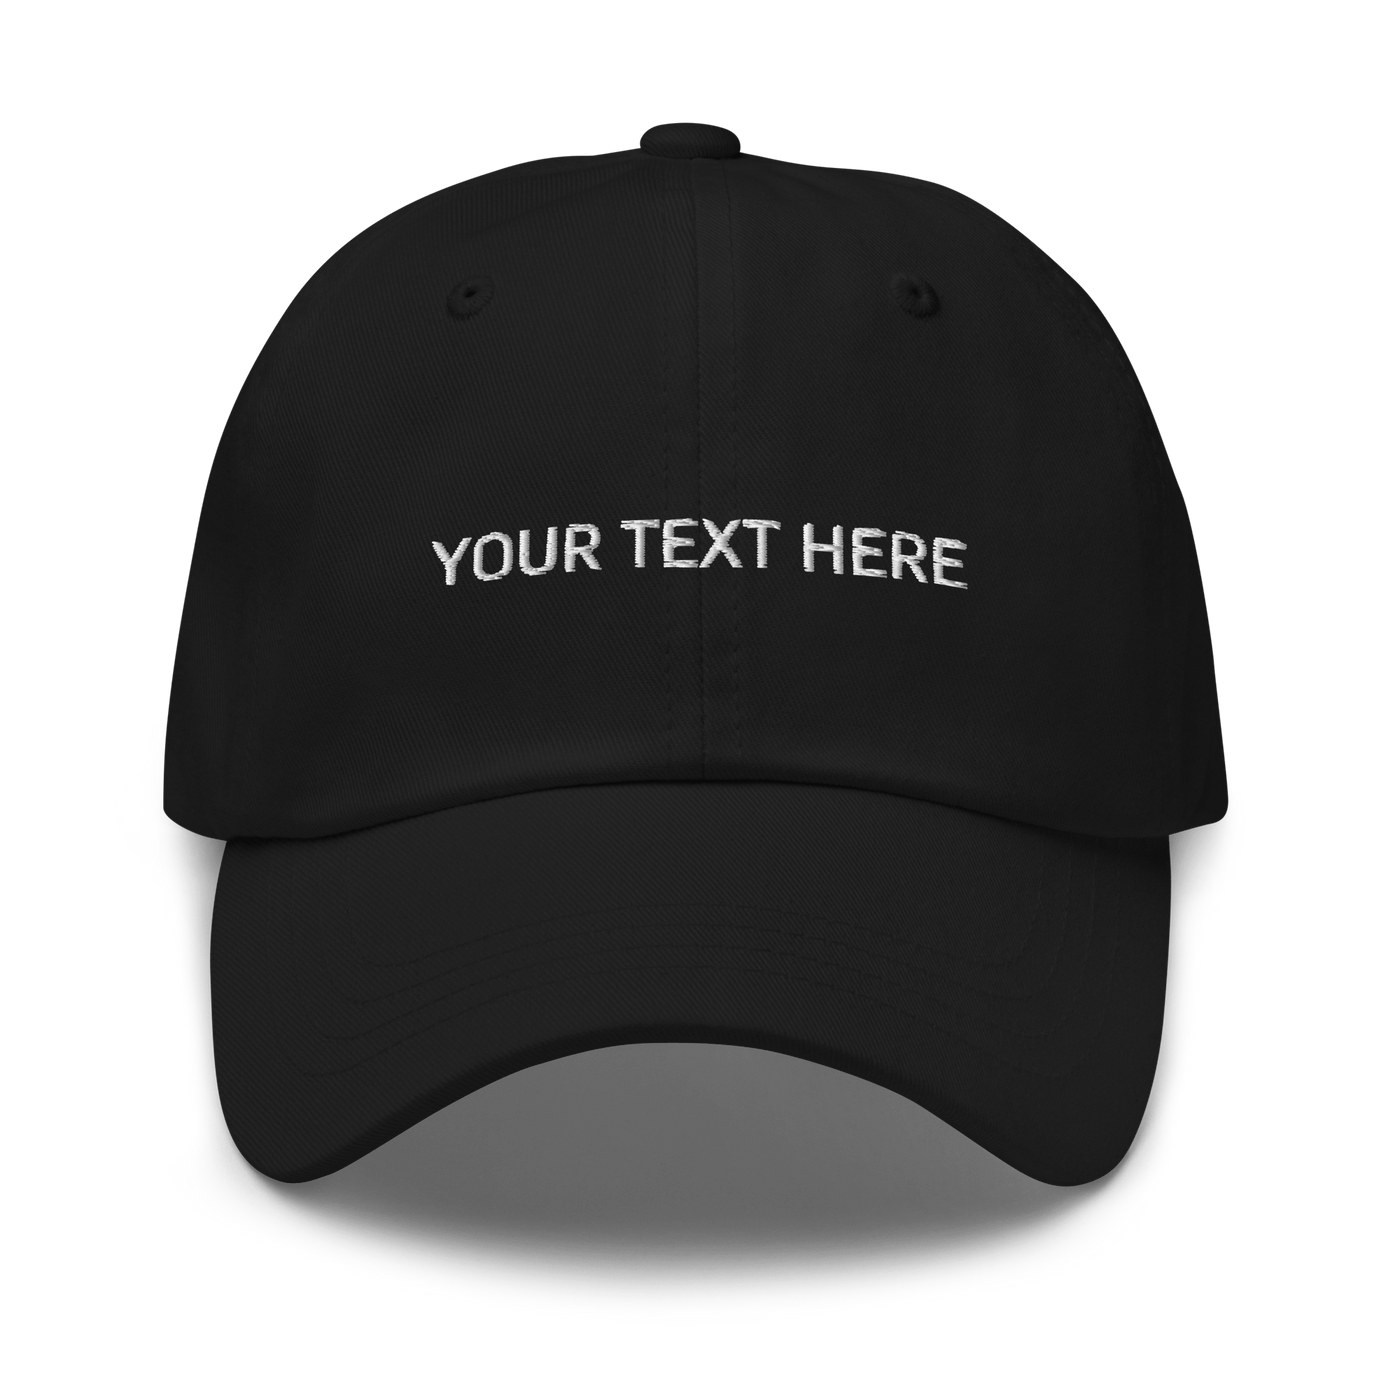 Customize Your own Dad Hat - Black - - Just Another Cap Store